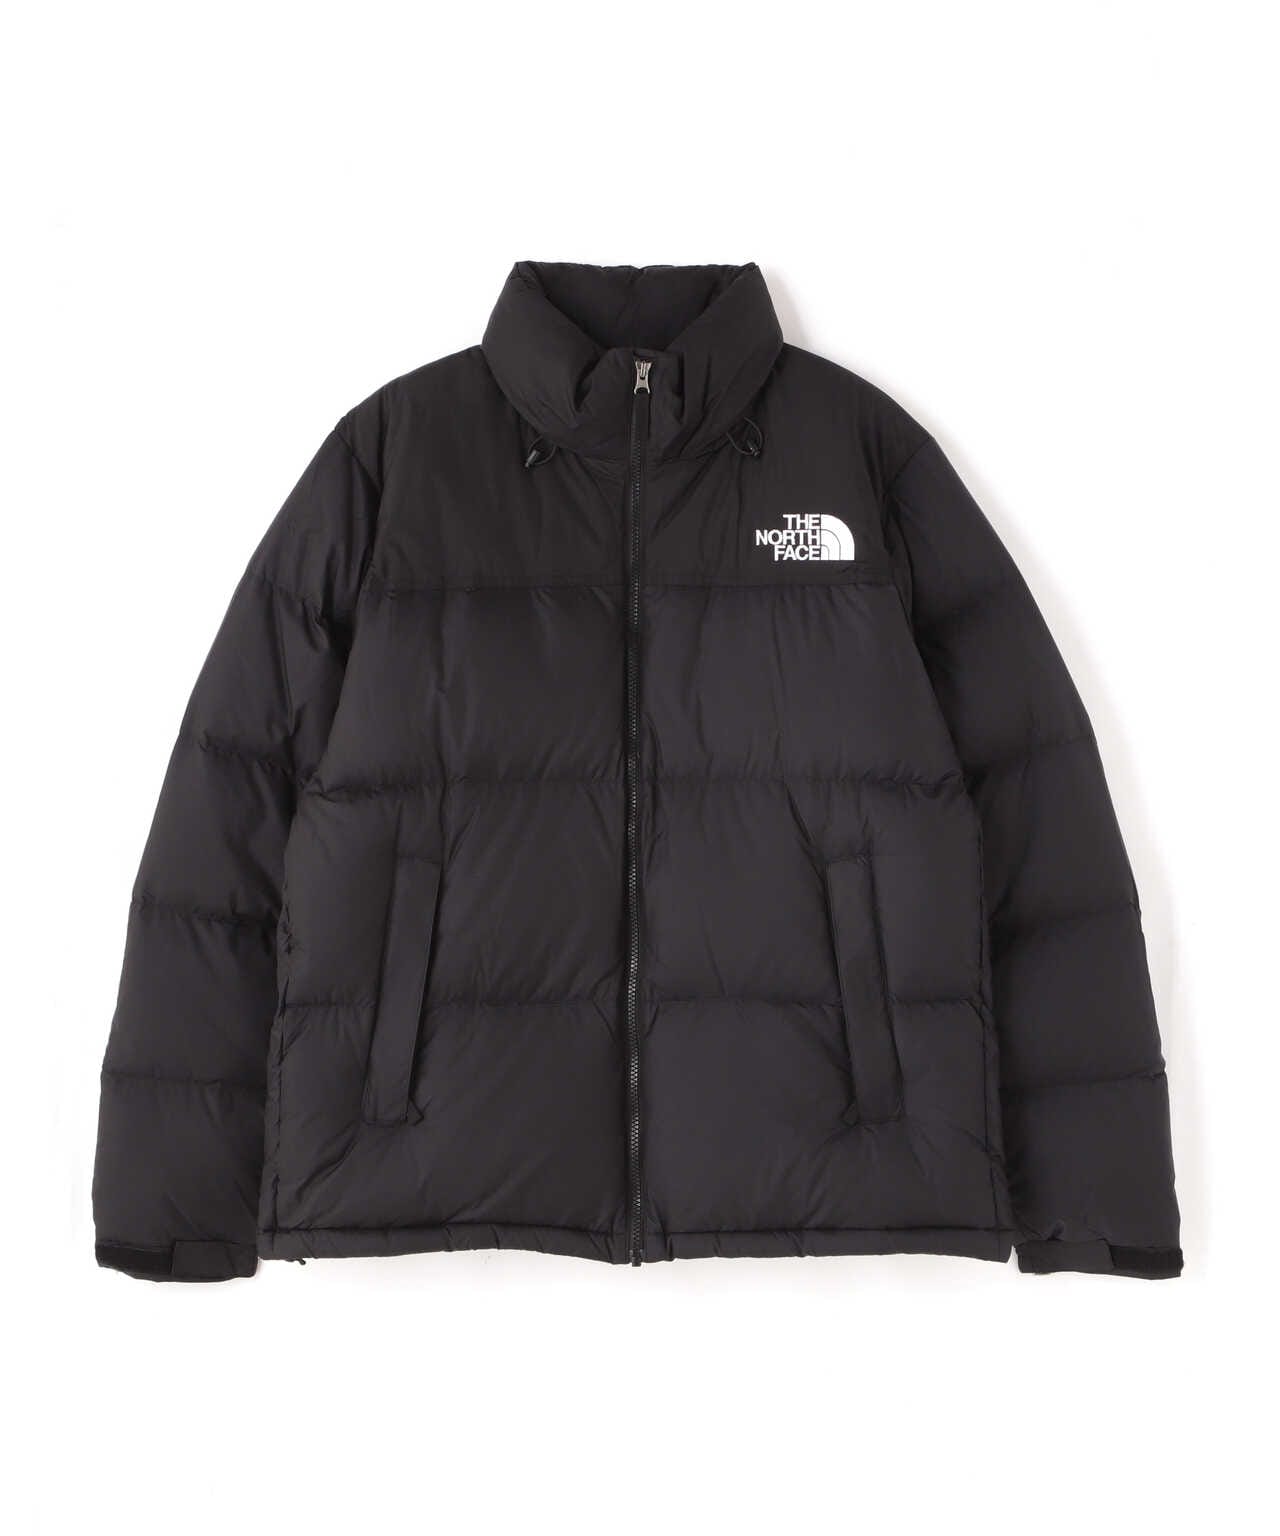 THE NORTH FACE】 Nuptse Jacket ヌプシ | eclipseseal.com